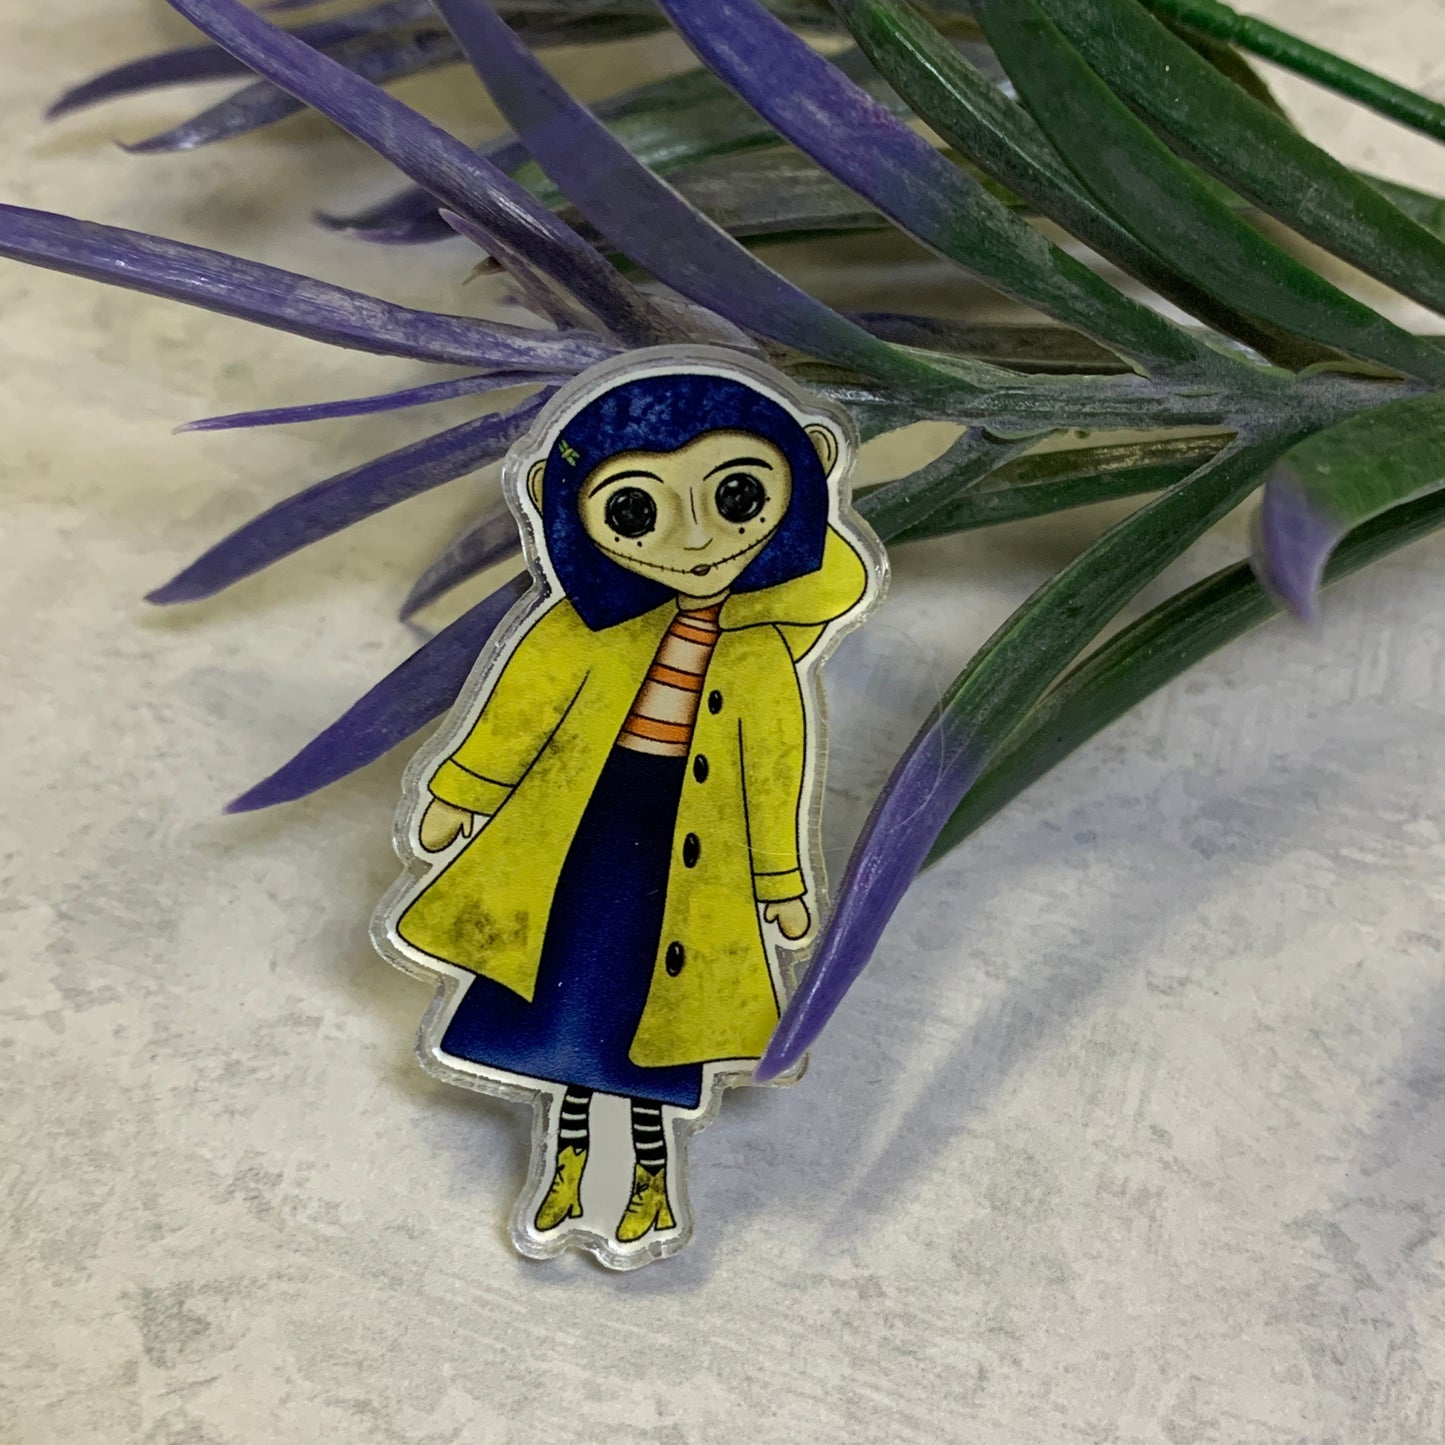 Coraline Acrylic Pins Other Mother Wybie Doll Halloween Trading Pins Collectible Pins Set - TinakayCreations